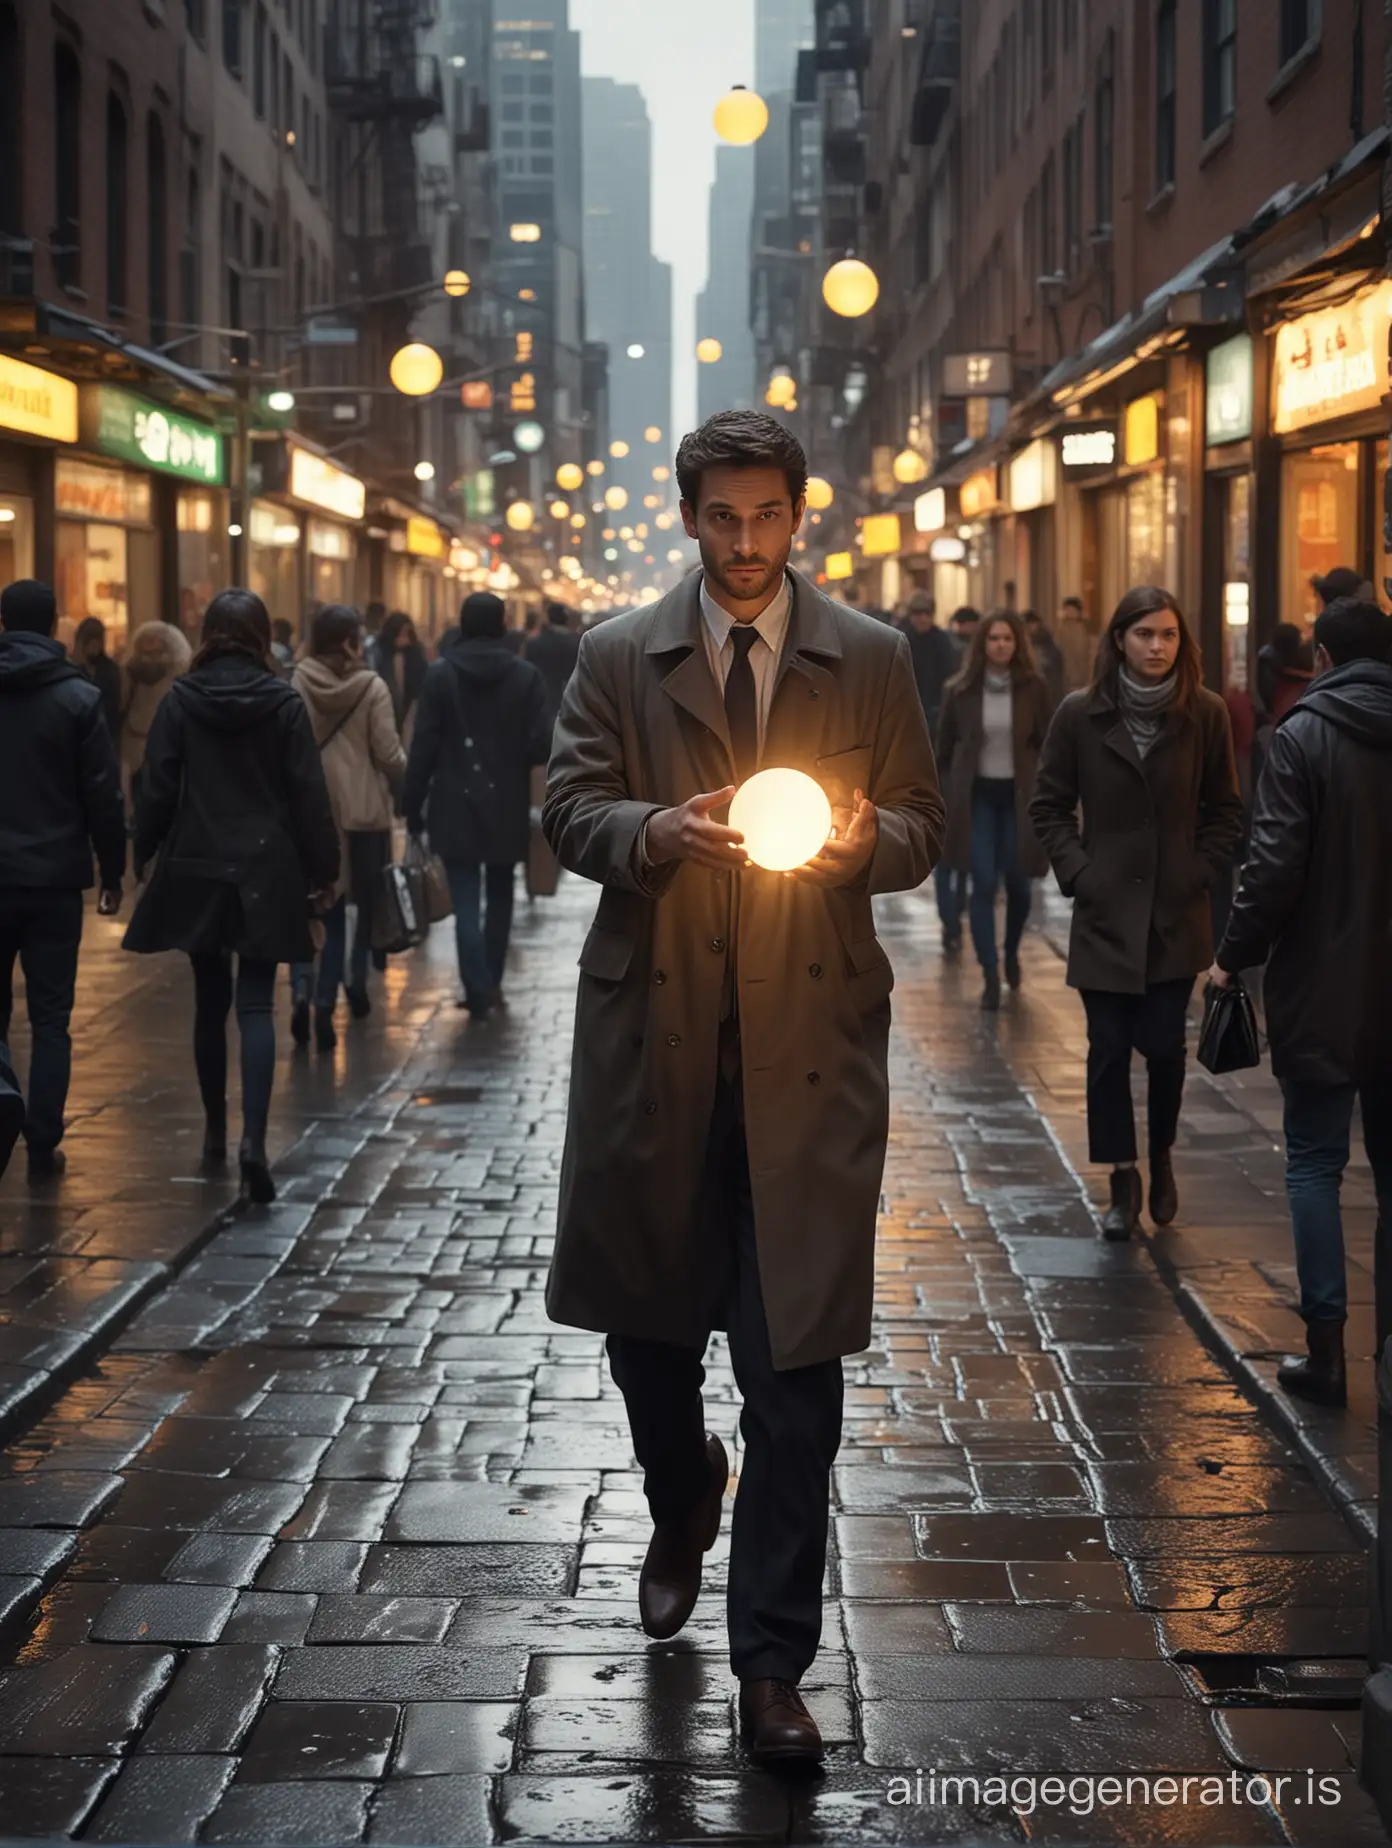 Please create an ultra-realistic image that portrays the concept of being prepared for opportunity. The setting is a busy urban environment with diverse people walking, which symbolizes the constant flow of opportunities. Focus on one individual in professional attire confidently catching a brightly glowing orb that represents 'opportunity', amidst a backdrop of a regular city life scene. Ensure that the image captures a decisive moment that clearly shows the person's readiness and ability to seize the opportunity. The lighting should be natural, just like a sunny day, to enhance the realism. The expression on the individual's face should convey anticipation and readiness, not reliance on luck, but on preparation and ability